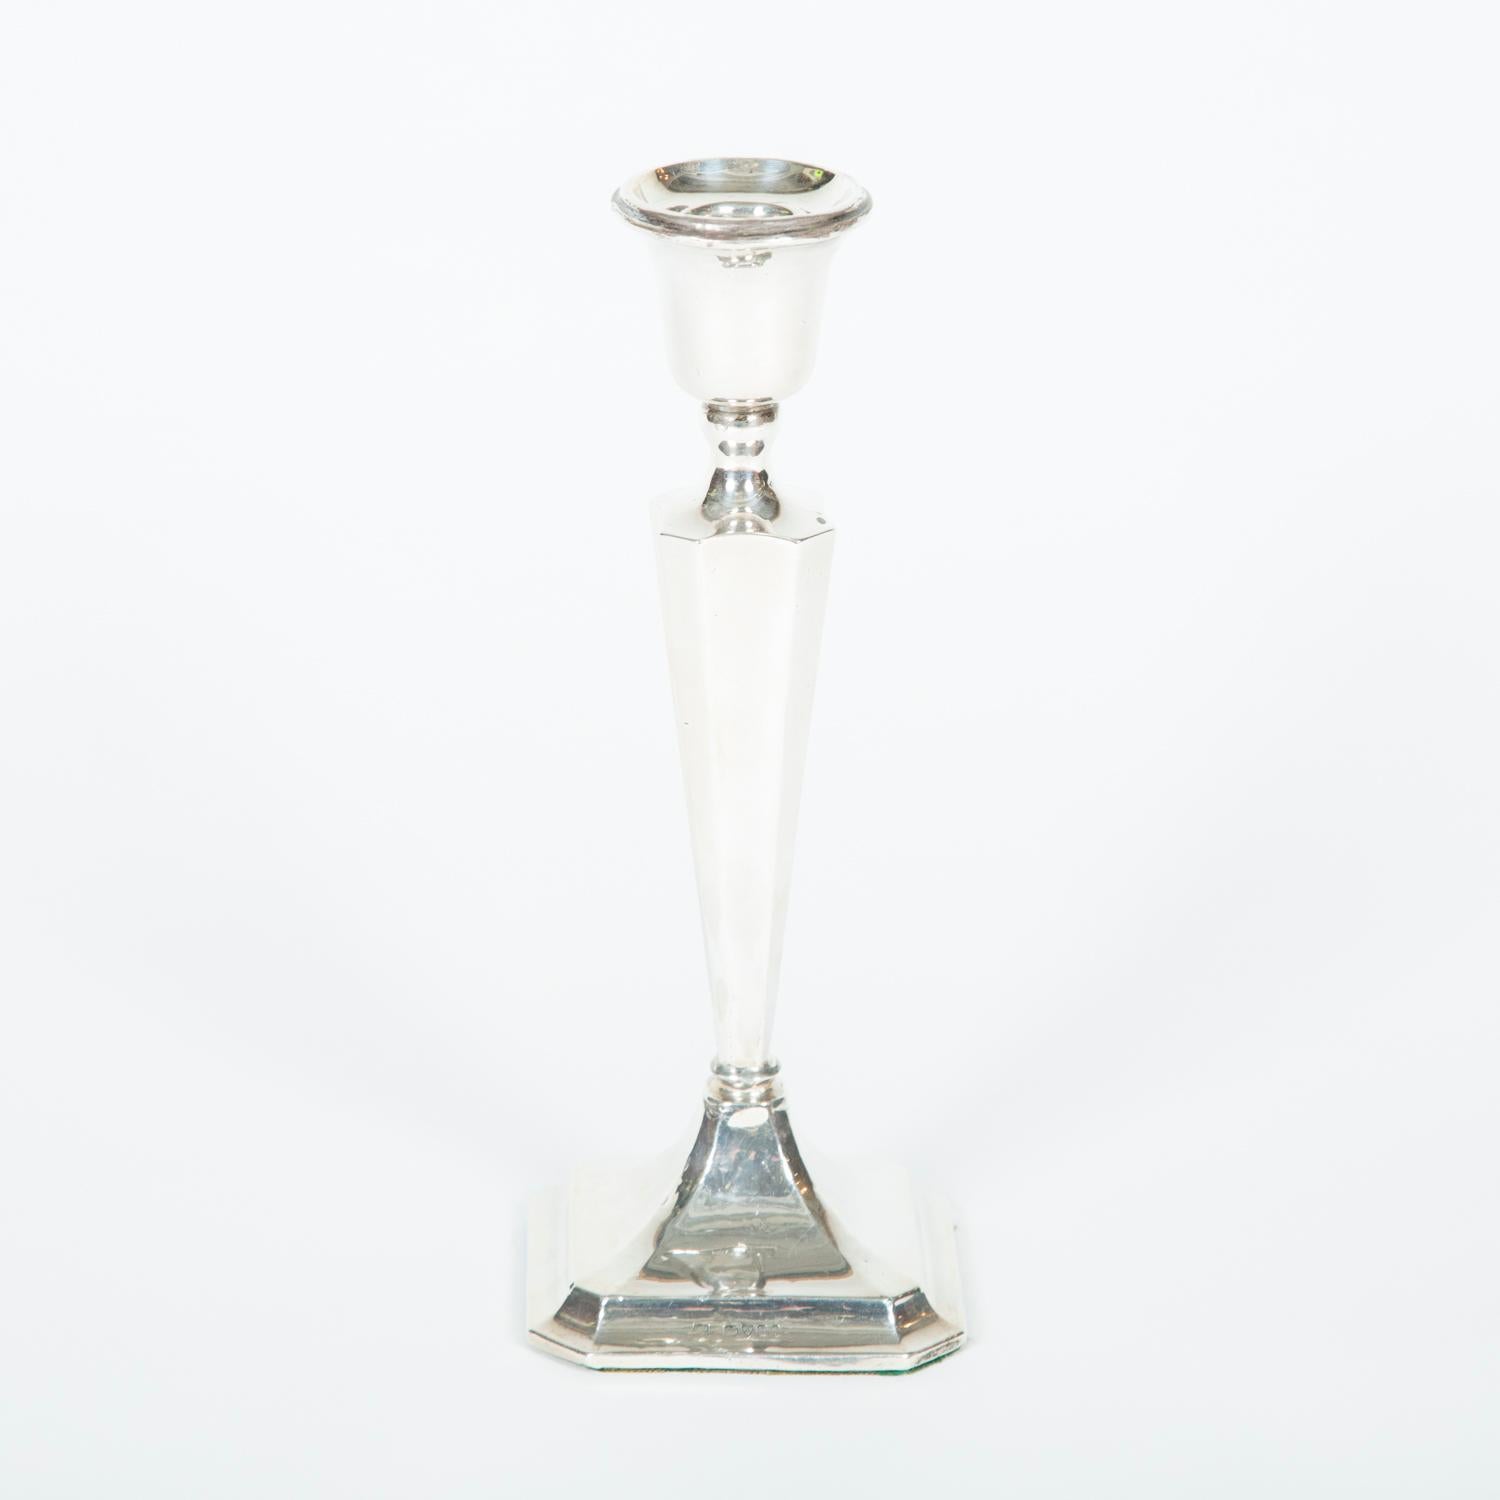 Silver candlestick with Chester hallmarks.

Weight: 500 g.